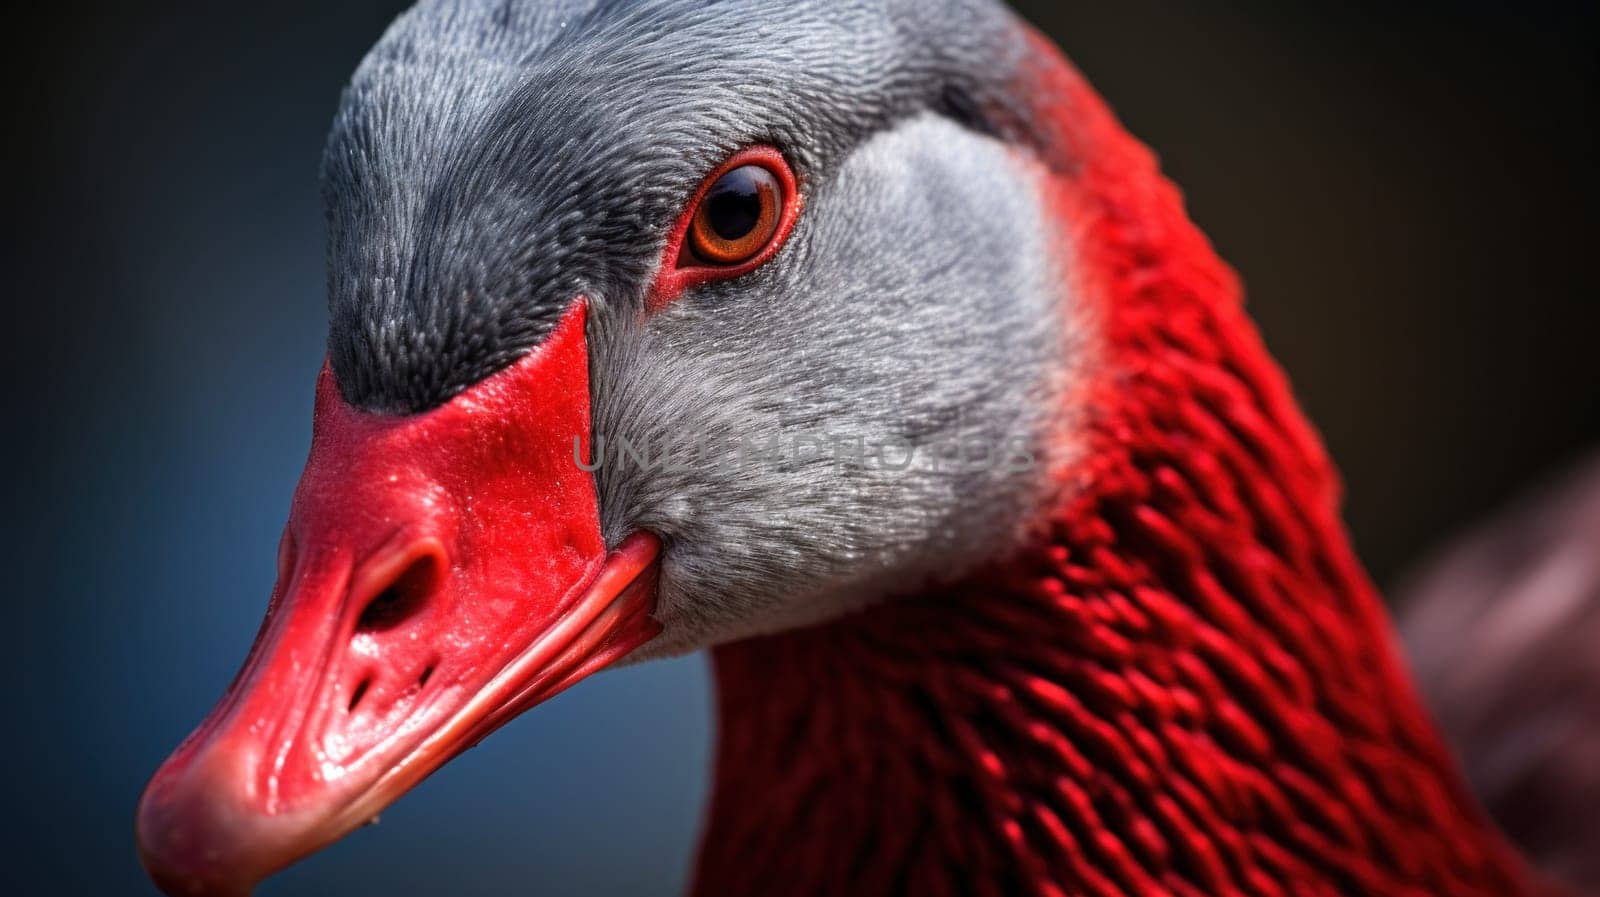 A close up of a bird with red and grey feathers